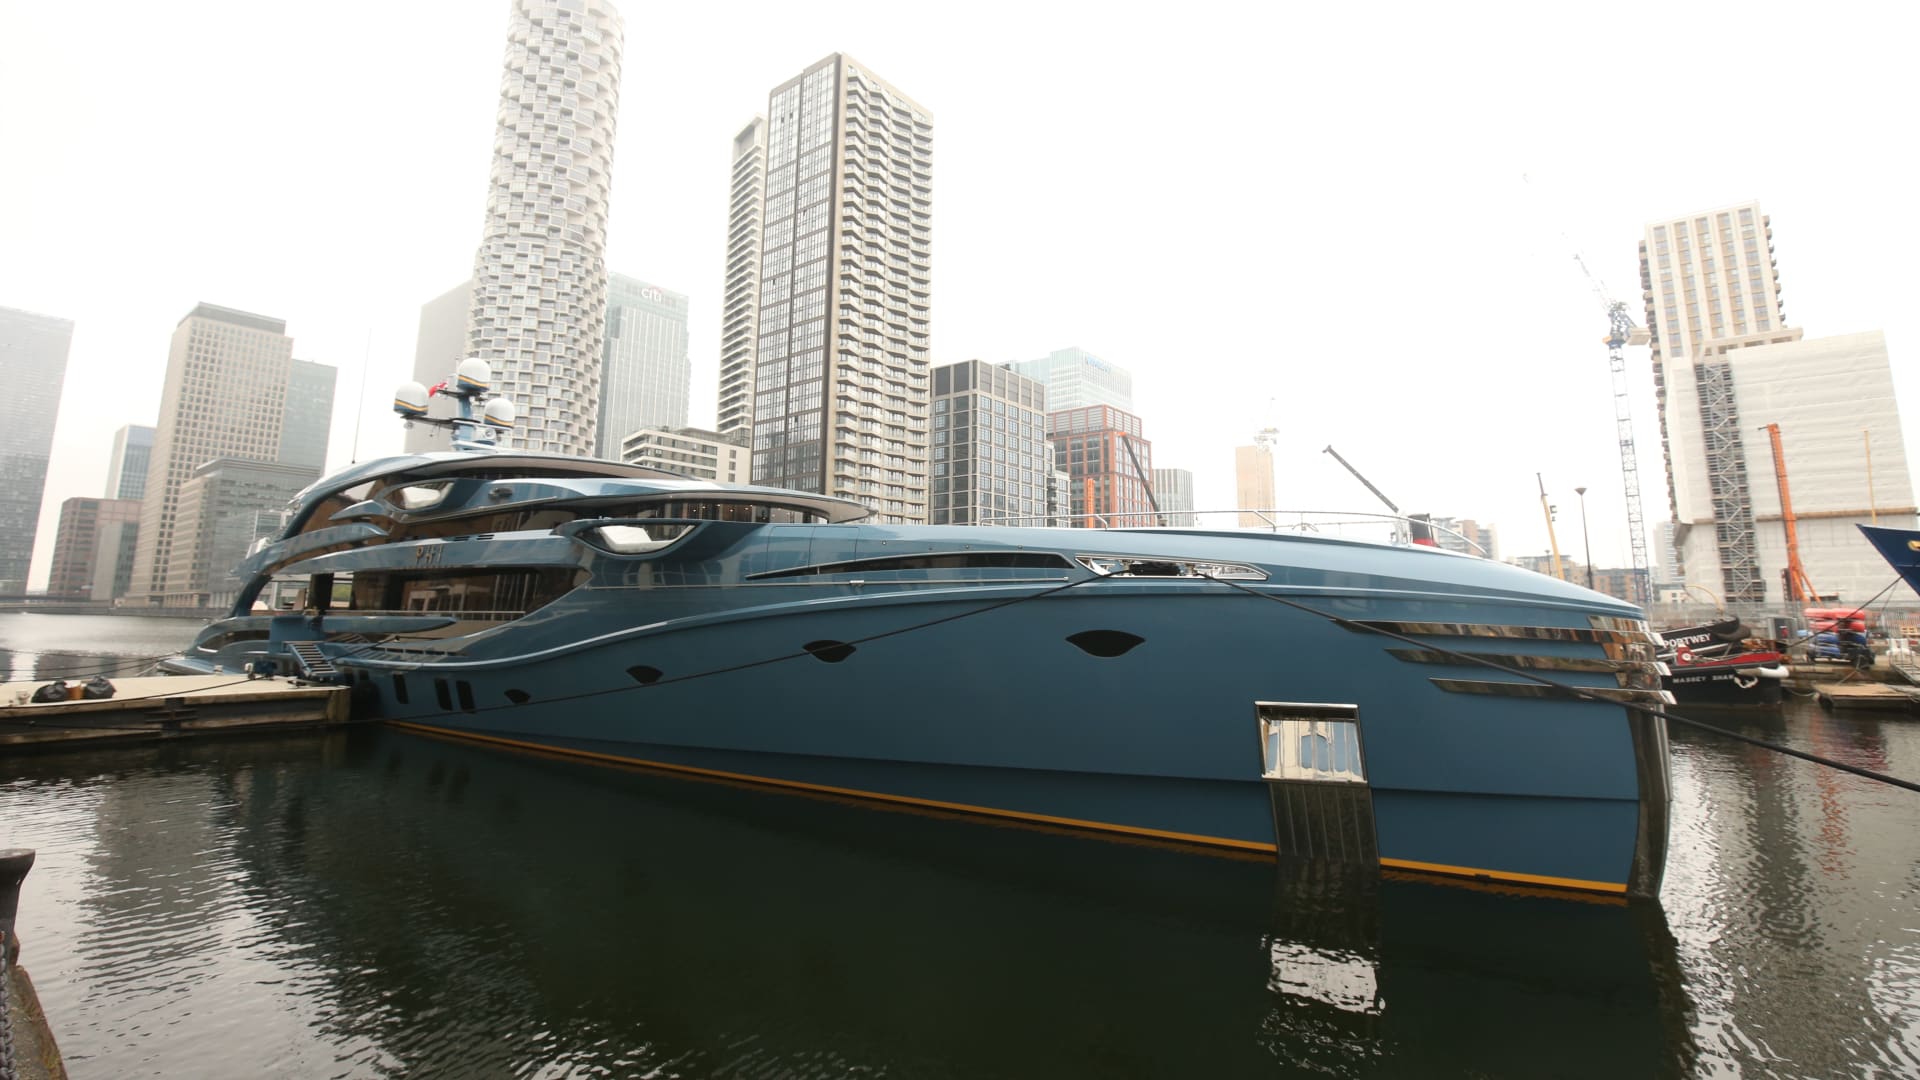 The superyacht Phi owned by a Russian businessman in Canary Wharf, east London which has been detained as part of sanctions against Russia.